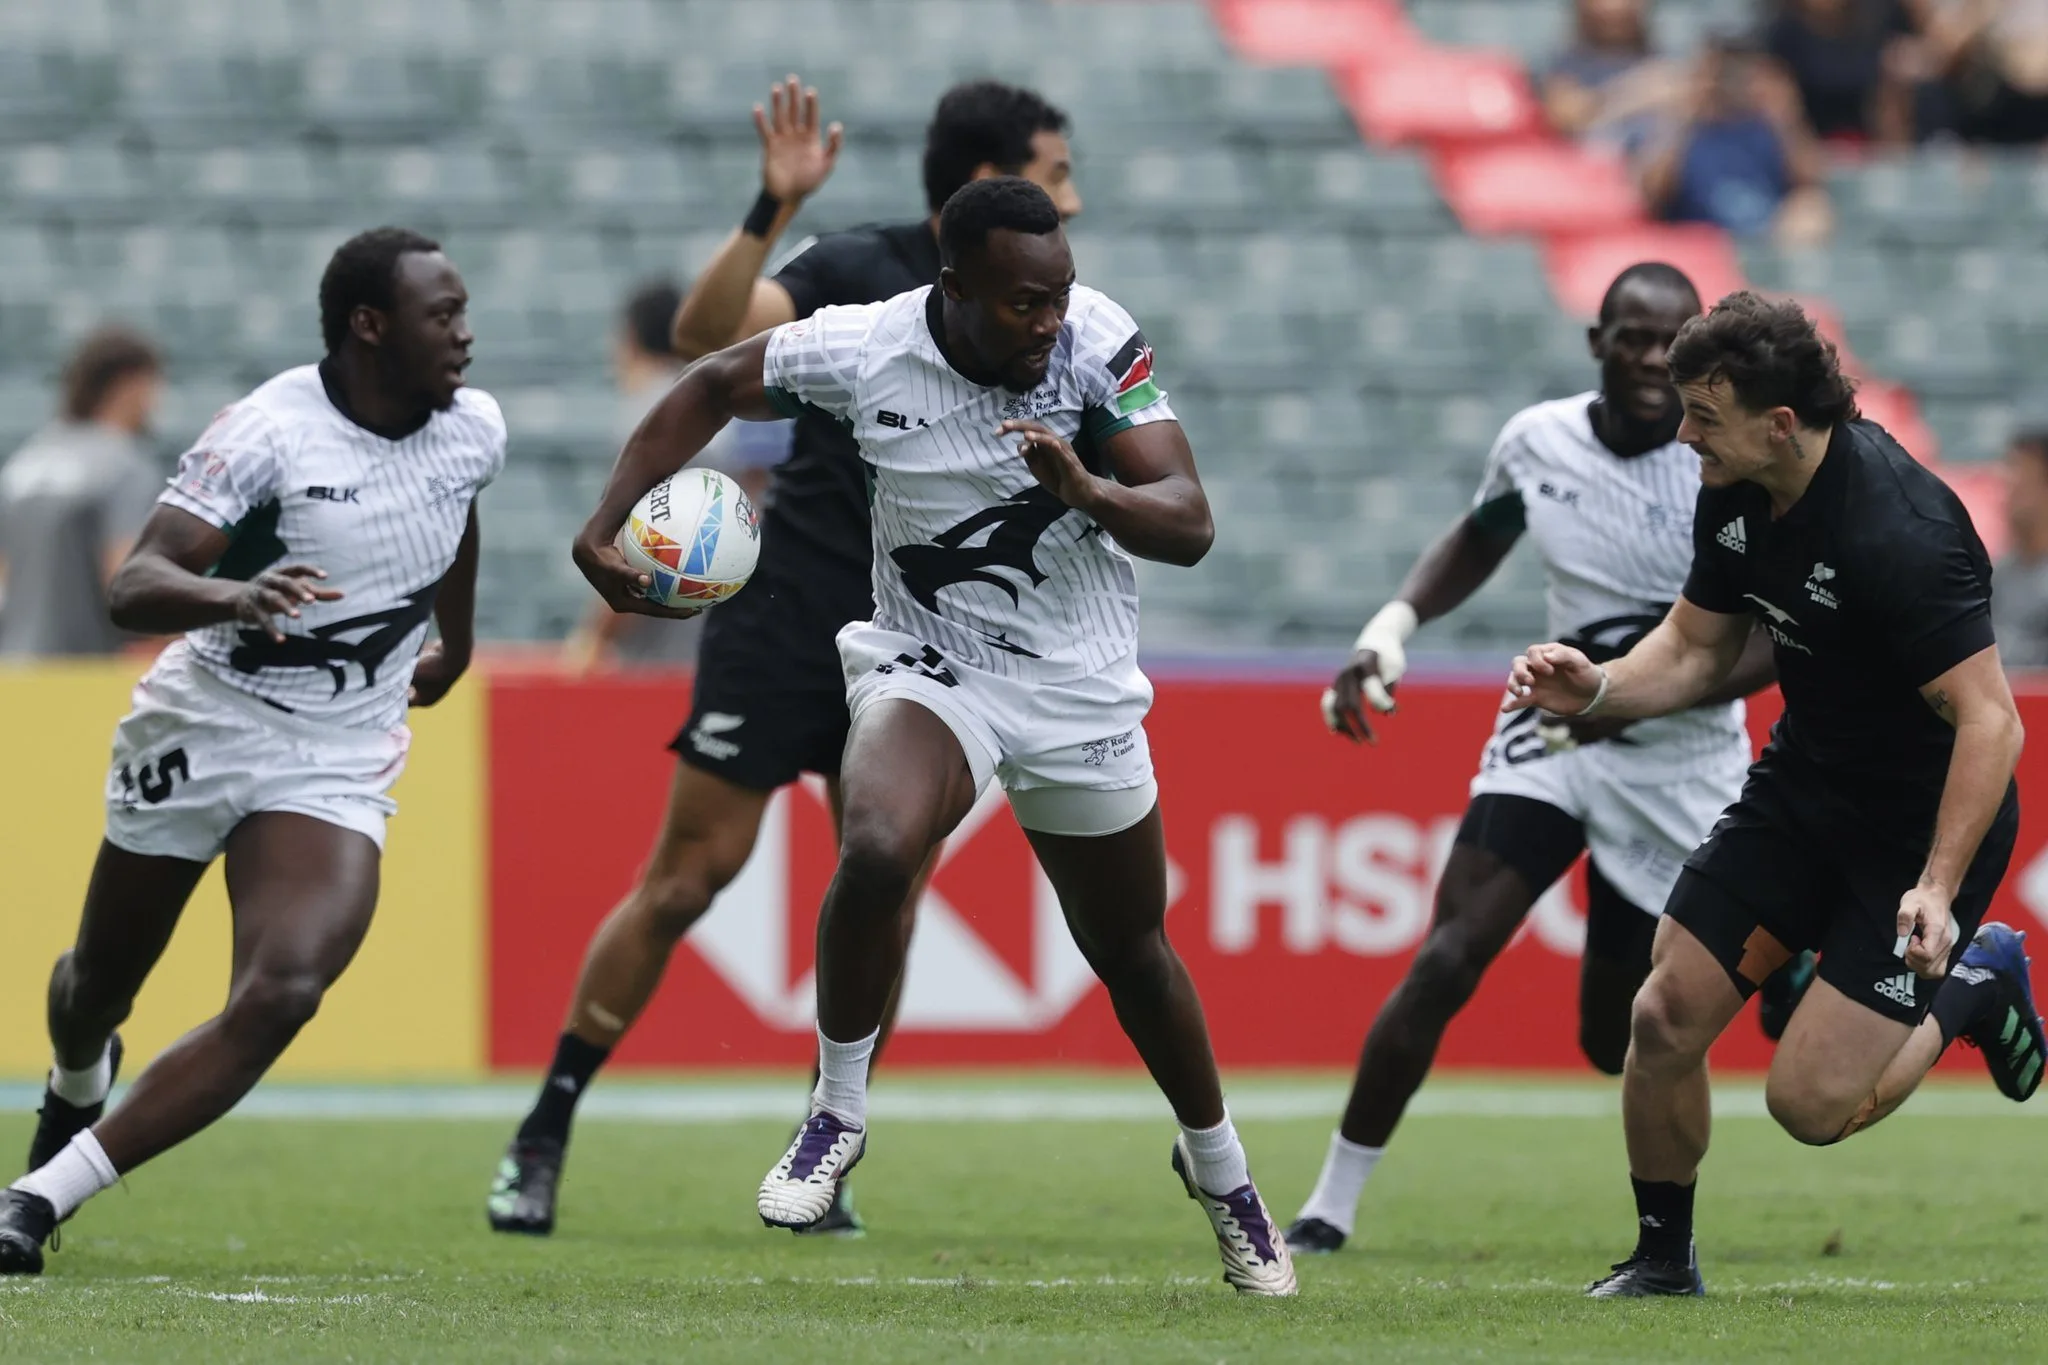 Kenya 7’s pooled with New Zealand, Argentina, and Spain For Capetown 7’s